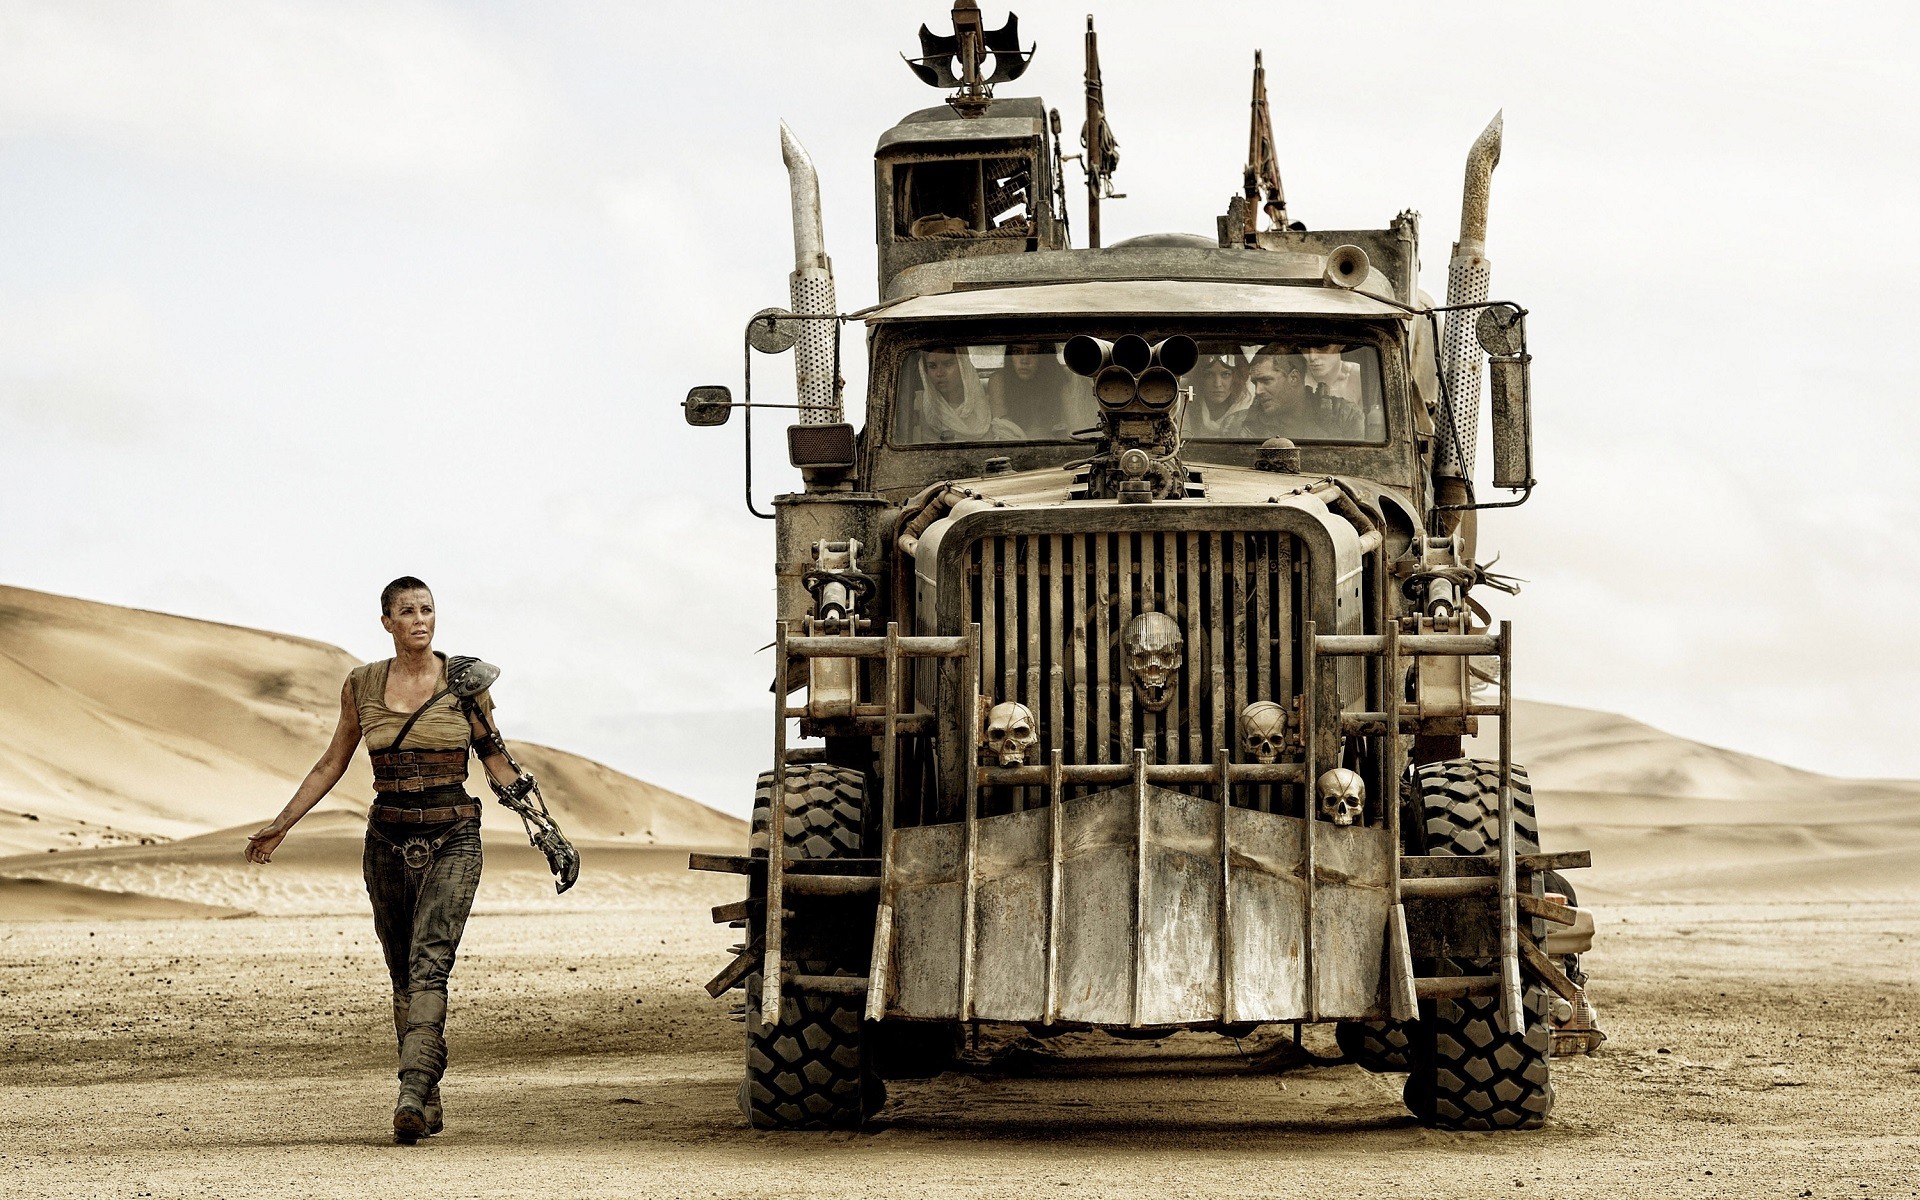 Mad Max Mad Max Fury Road Movies Women Men Actor Actress Charlize Theron Tom Hardy Zoe Kravitz Car T 1920x1200